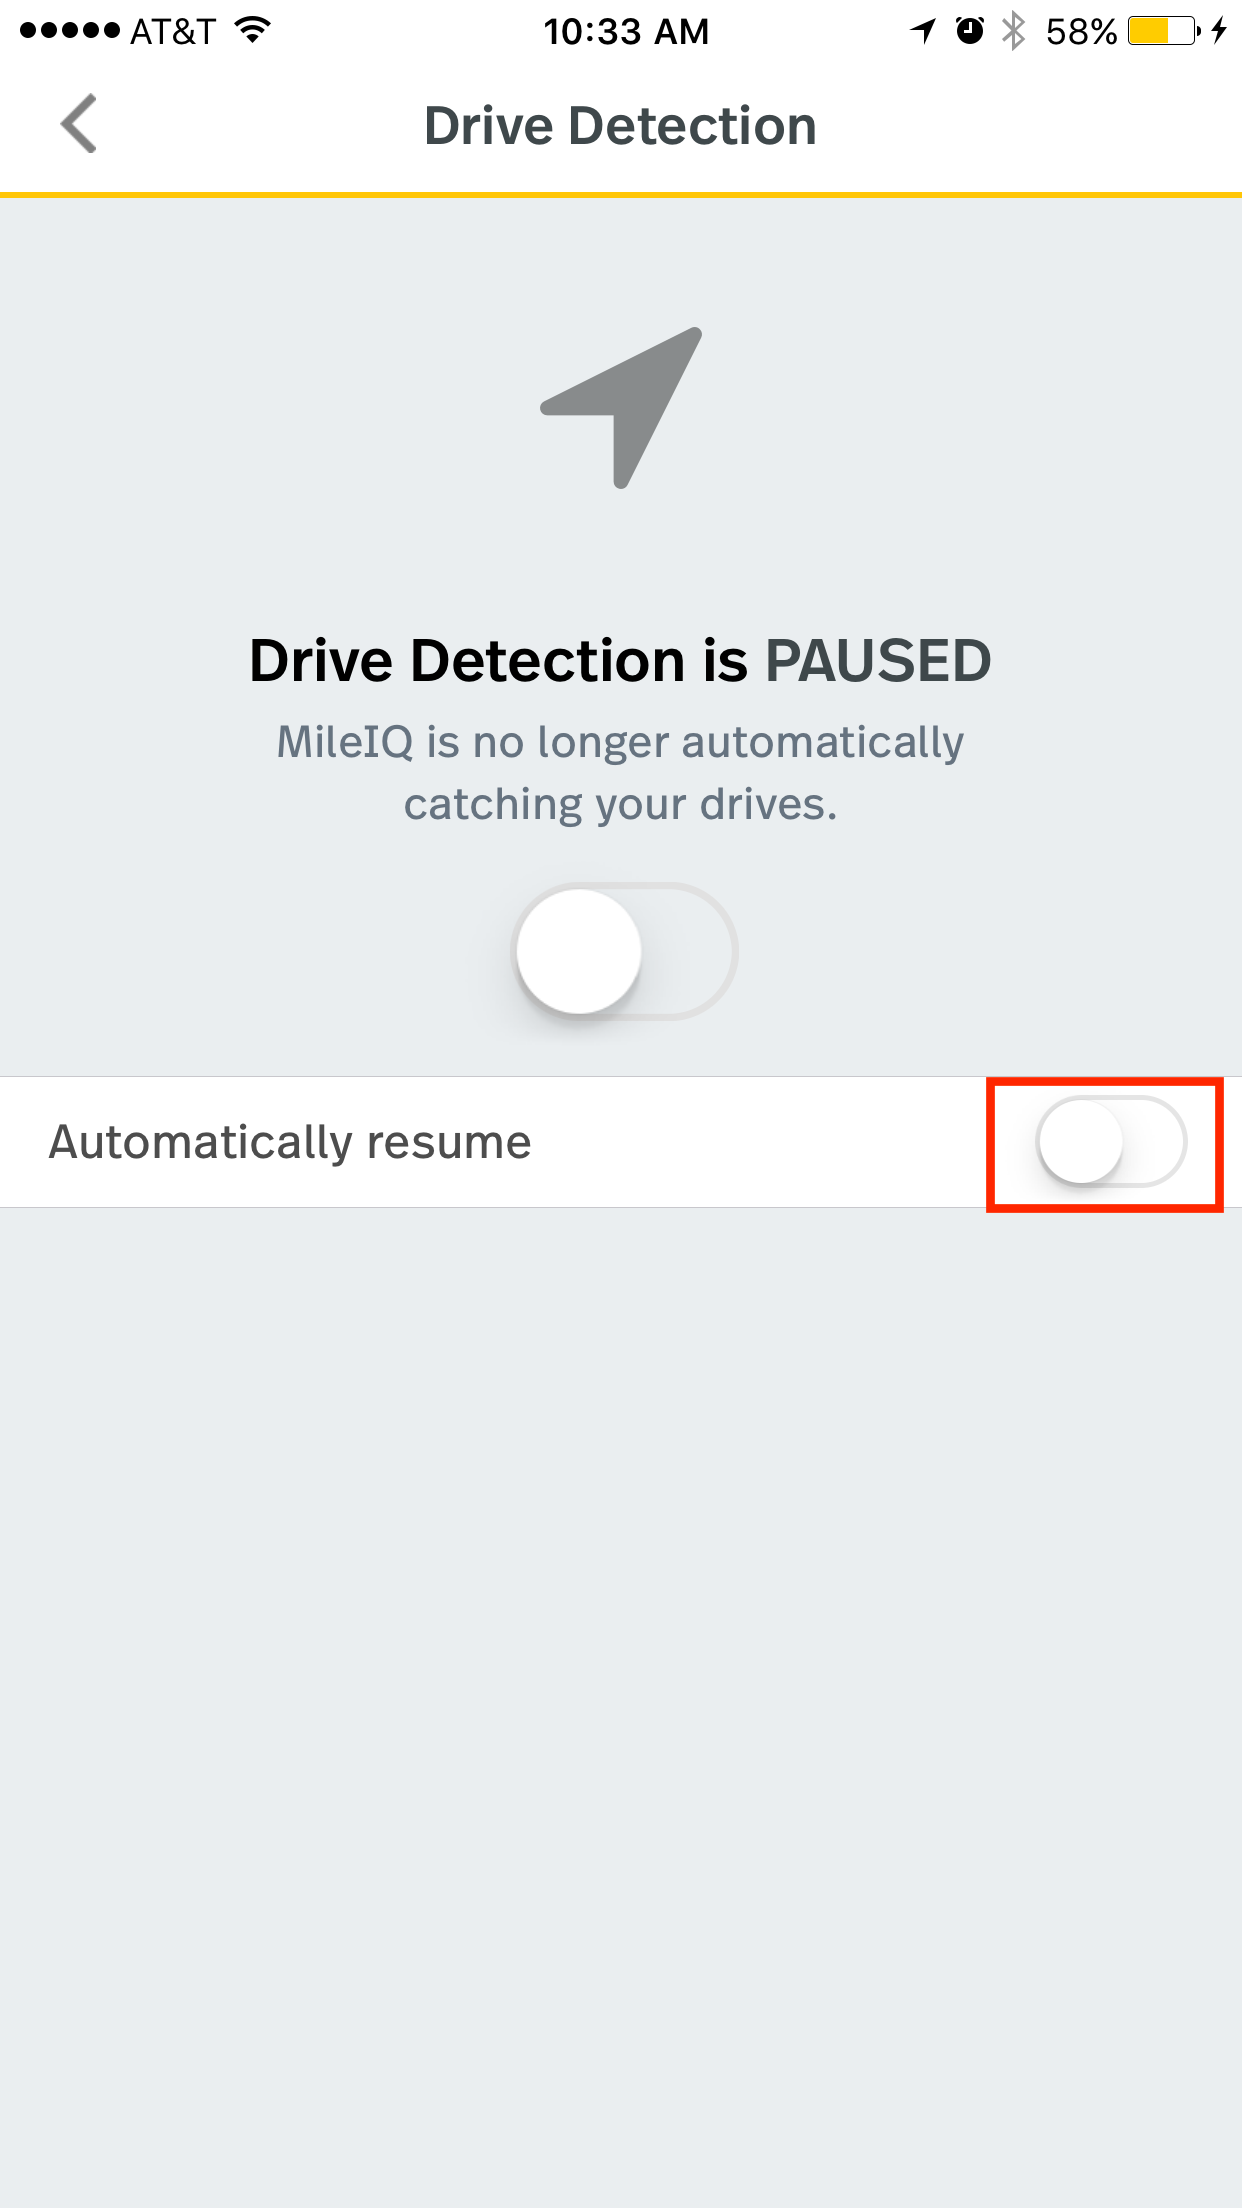 This image shows the drive detection page on the mobile app, highlighting the automatically resume toggle.